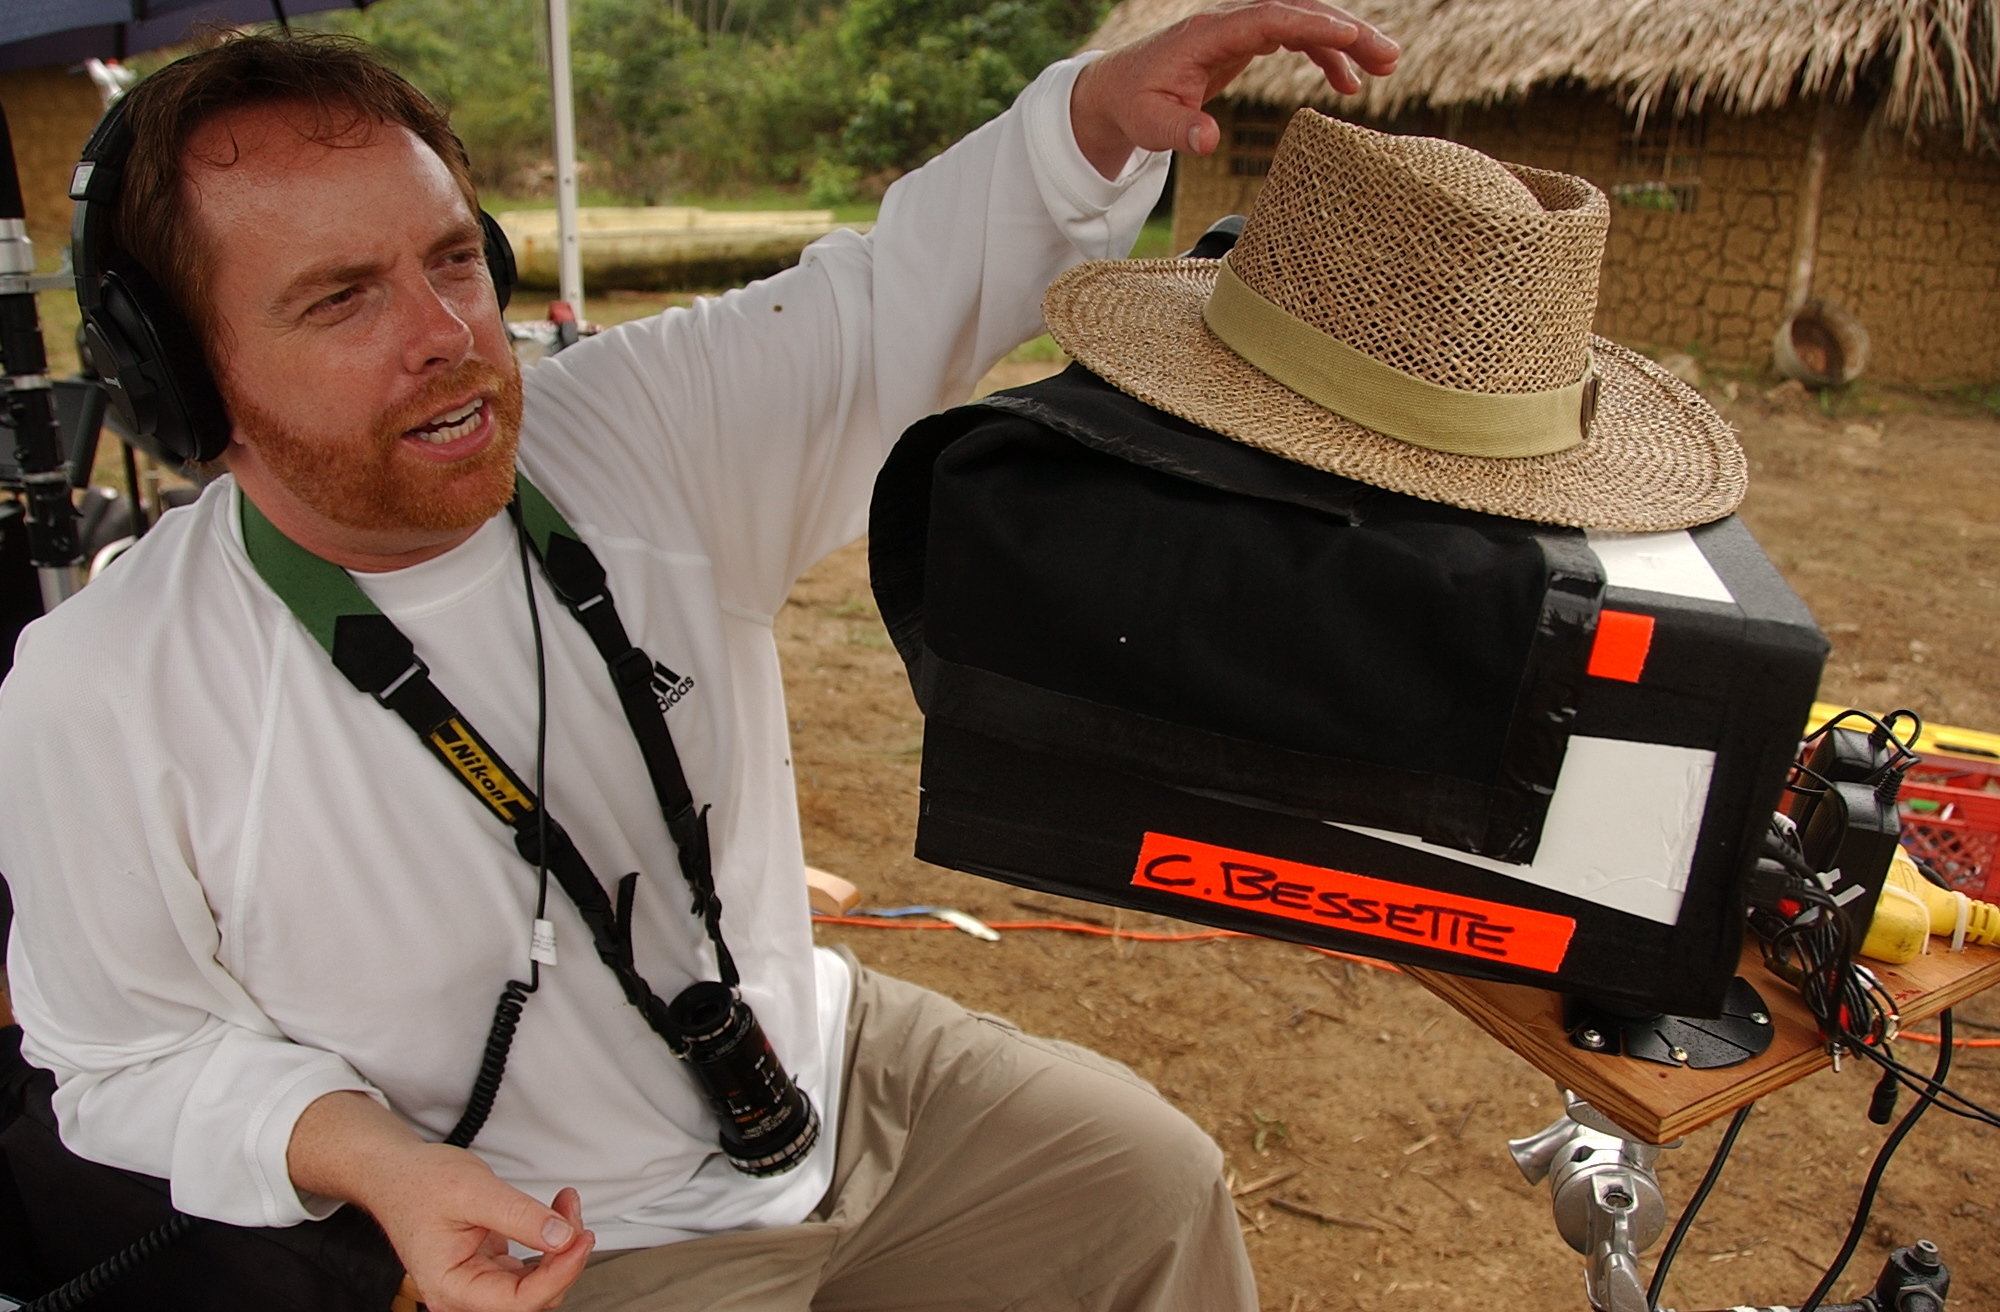 On location in Belize, Central America, filming 